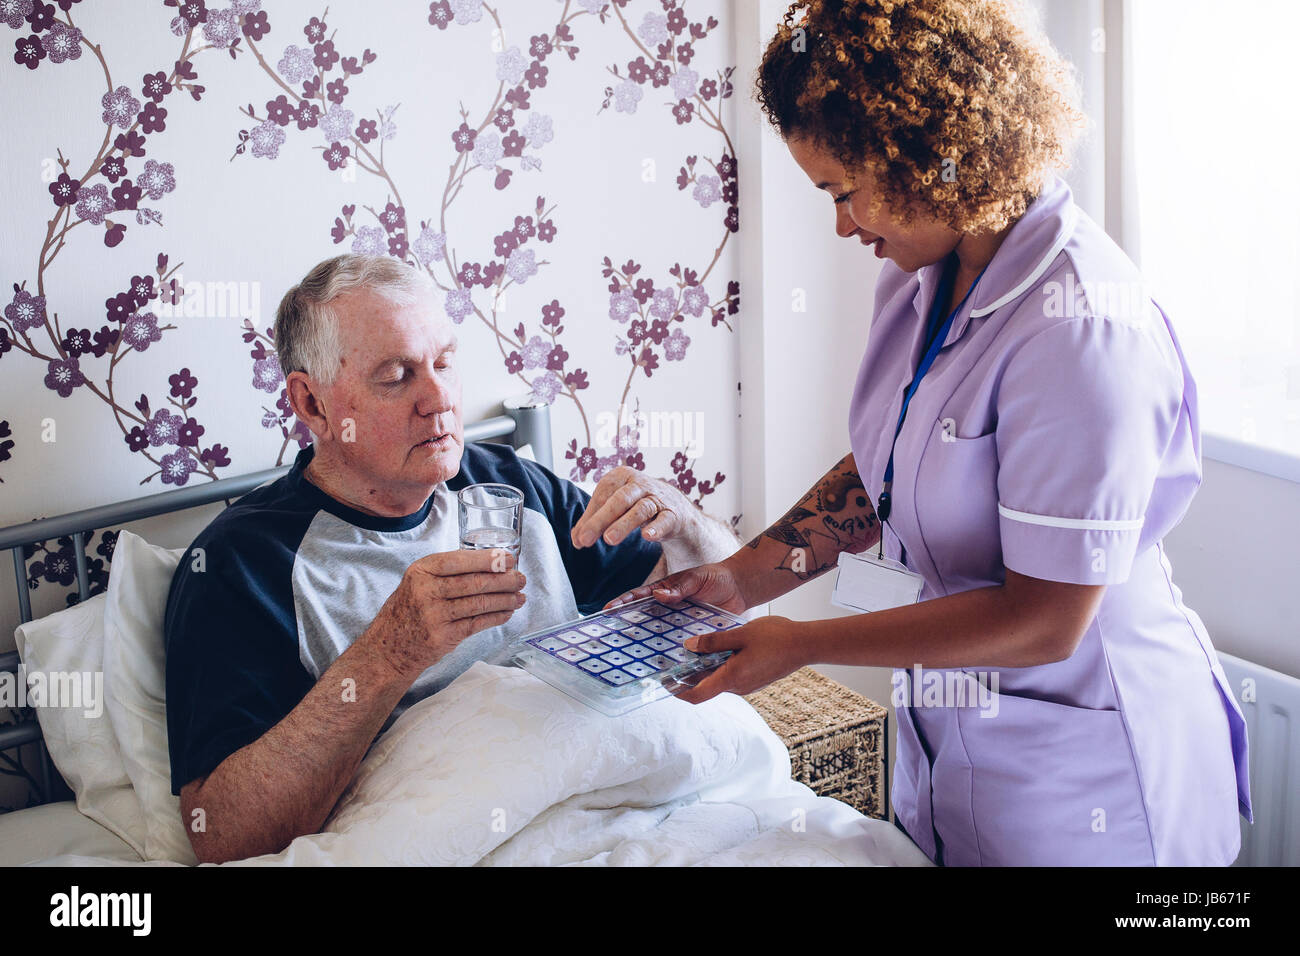 Bedbound senior man receiving assistance from a home caregiver. He is taking some medication with water. Stock Photo